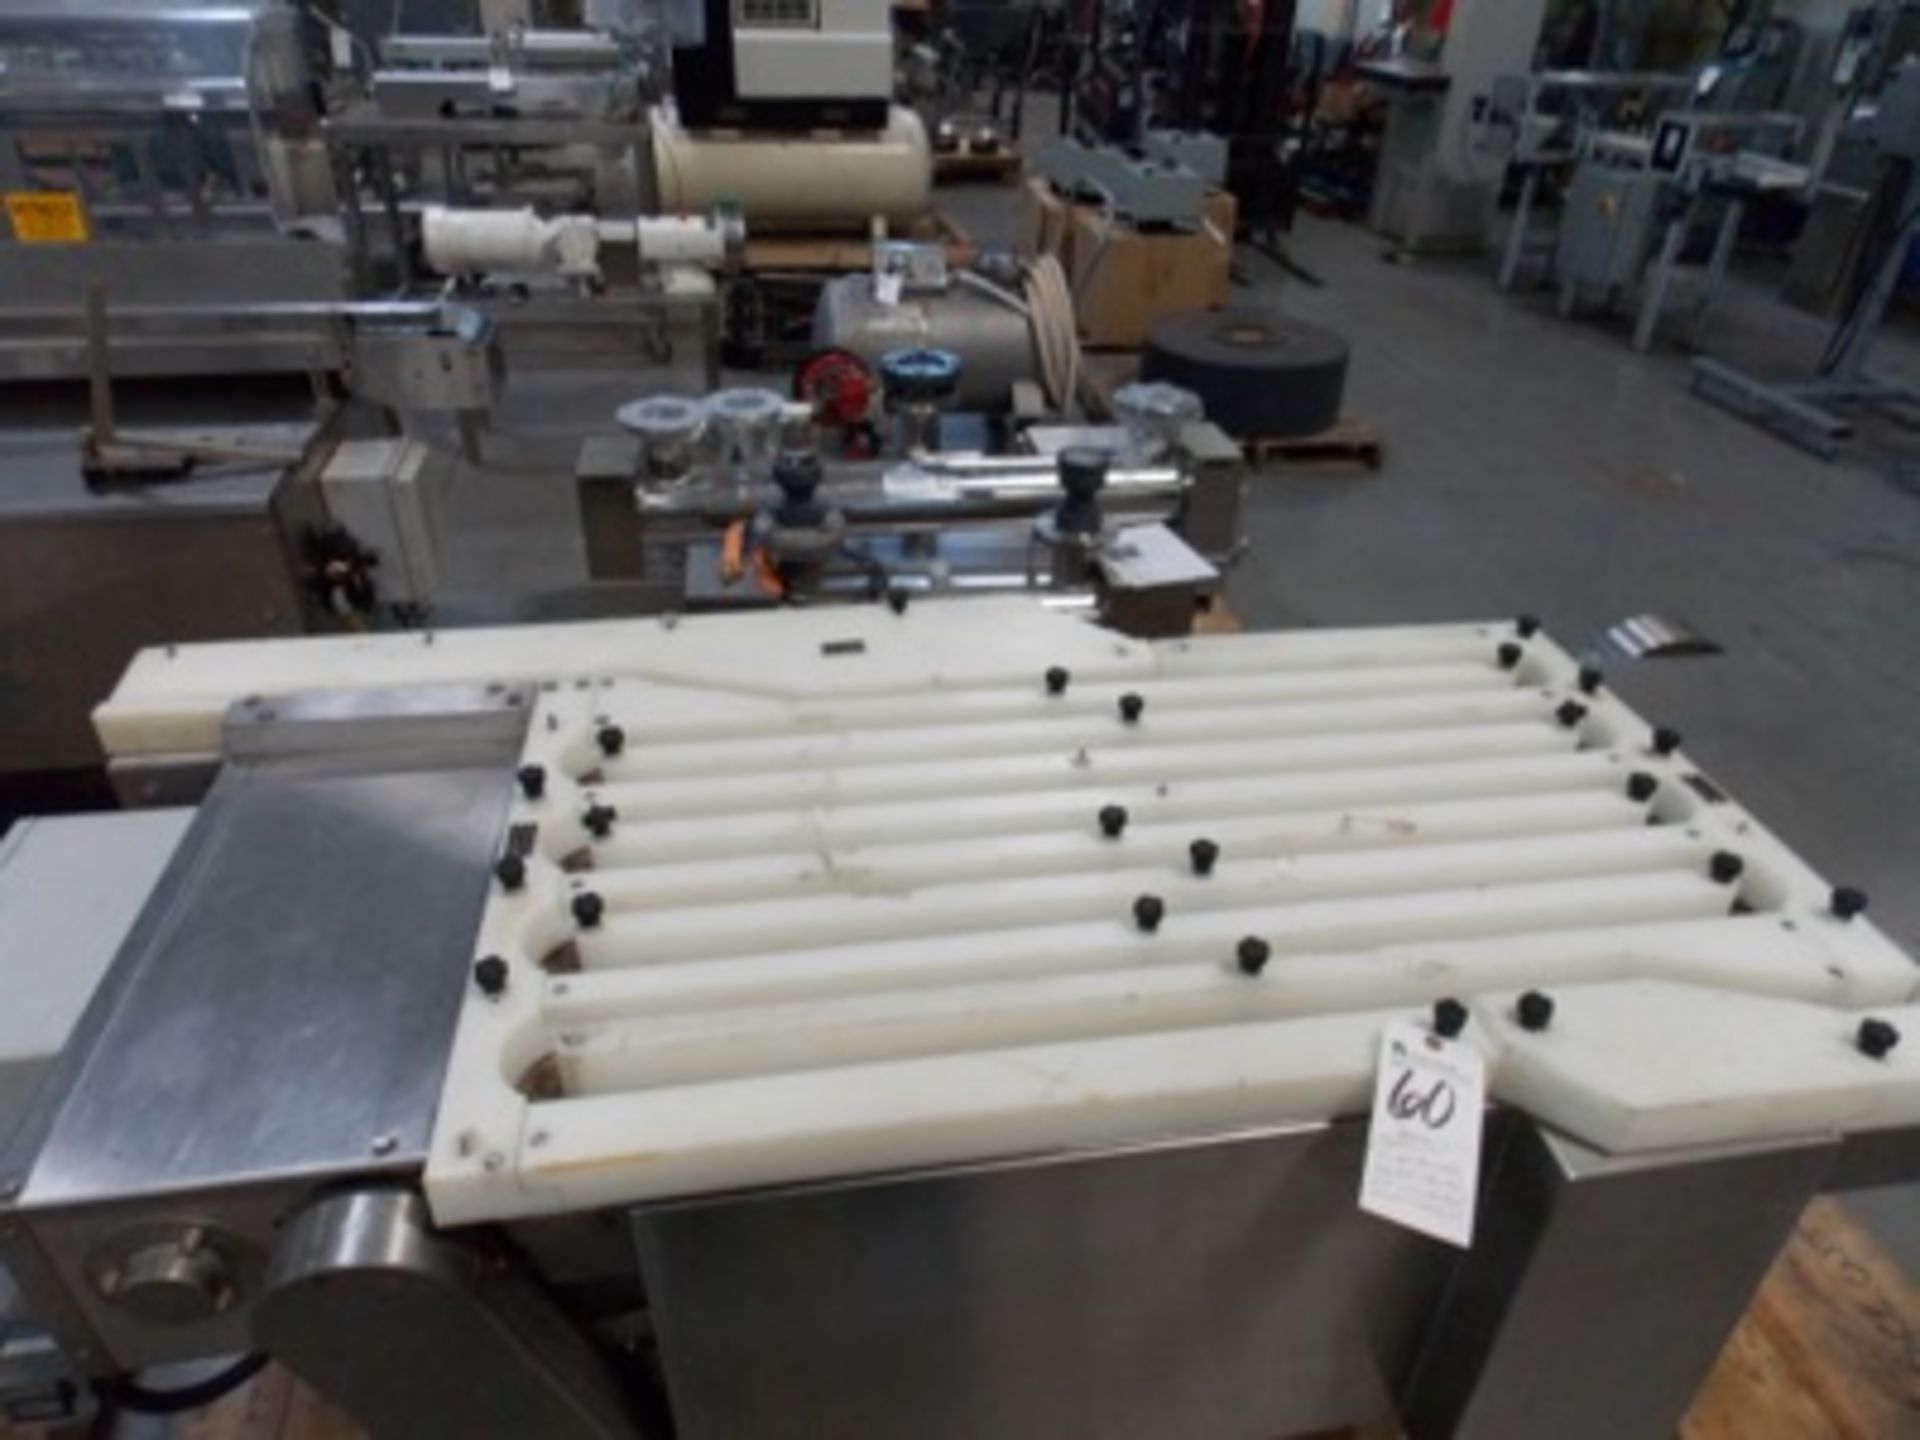 Garrey Multidirectional S.S. Bed Accumulation Surge Table, Surge Area 2' x 4' Infeed/Outfeed - Image 2 of 6